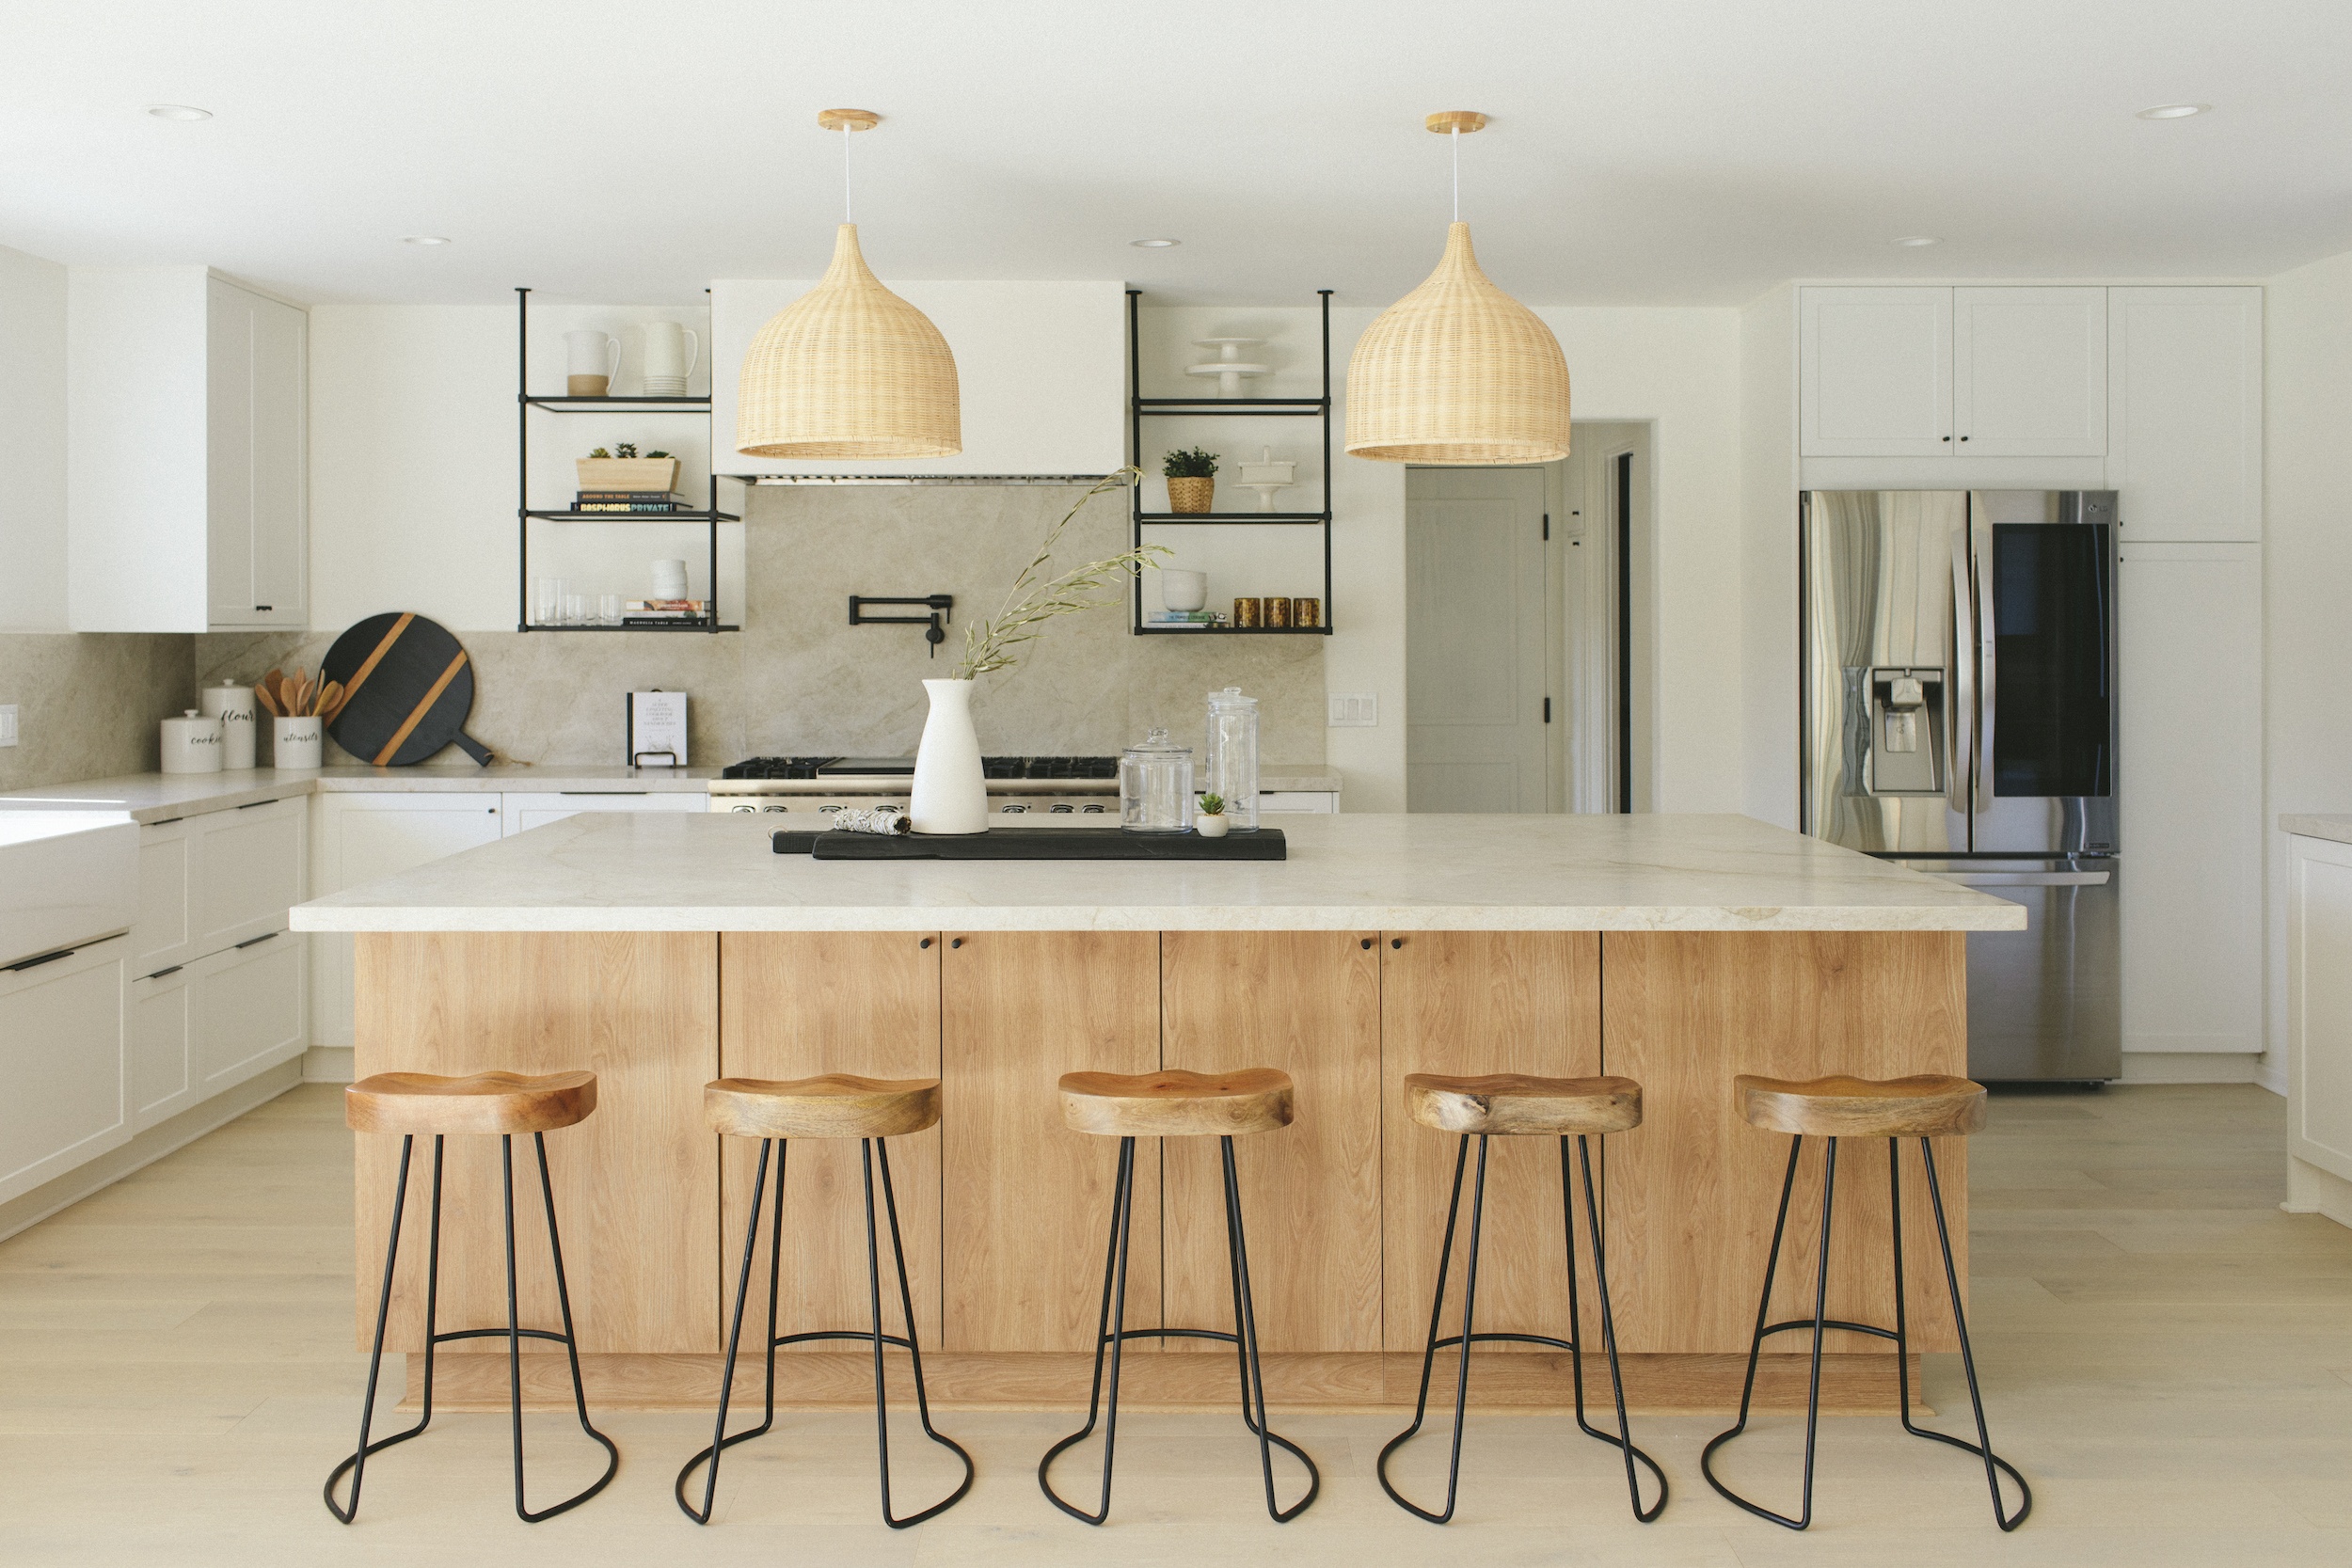 5 Kitchen Trends to Look Out for in 2021 - SemiStories